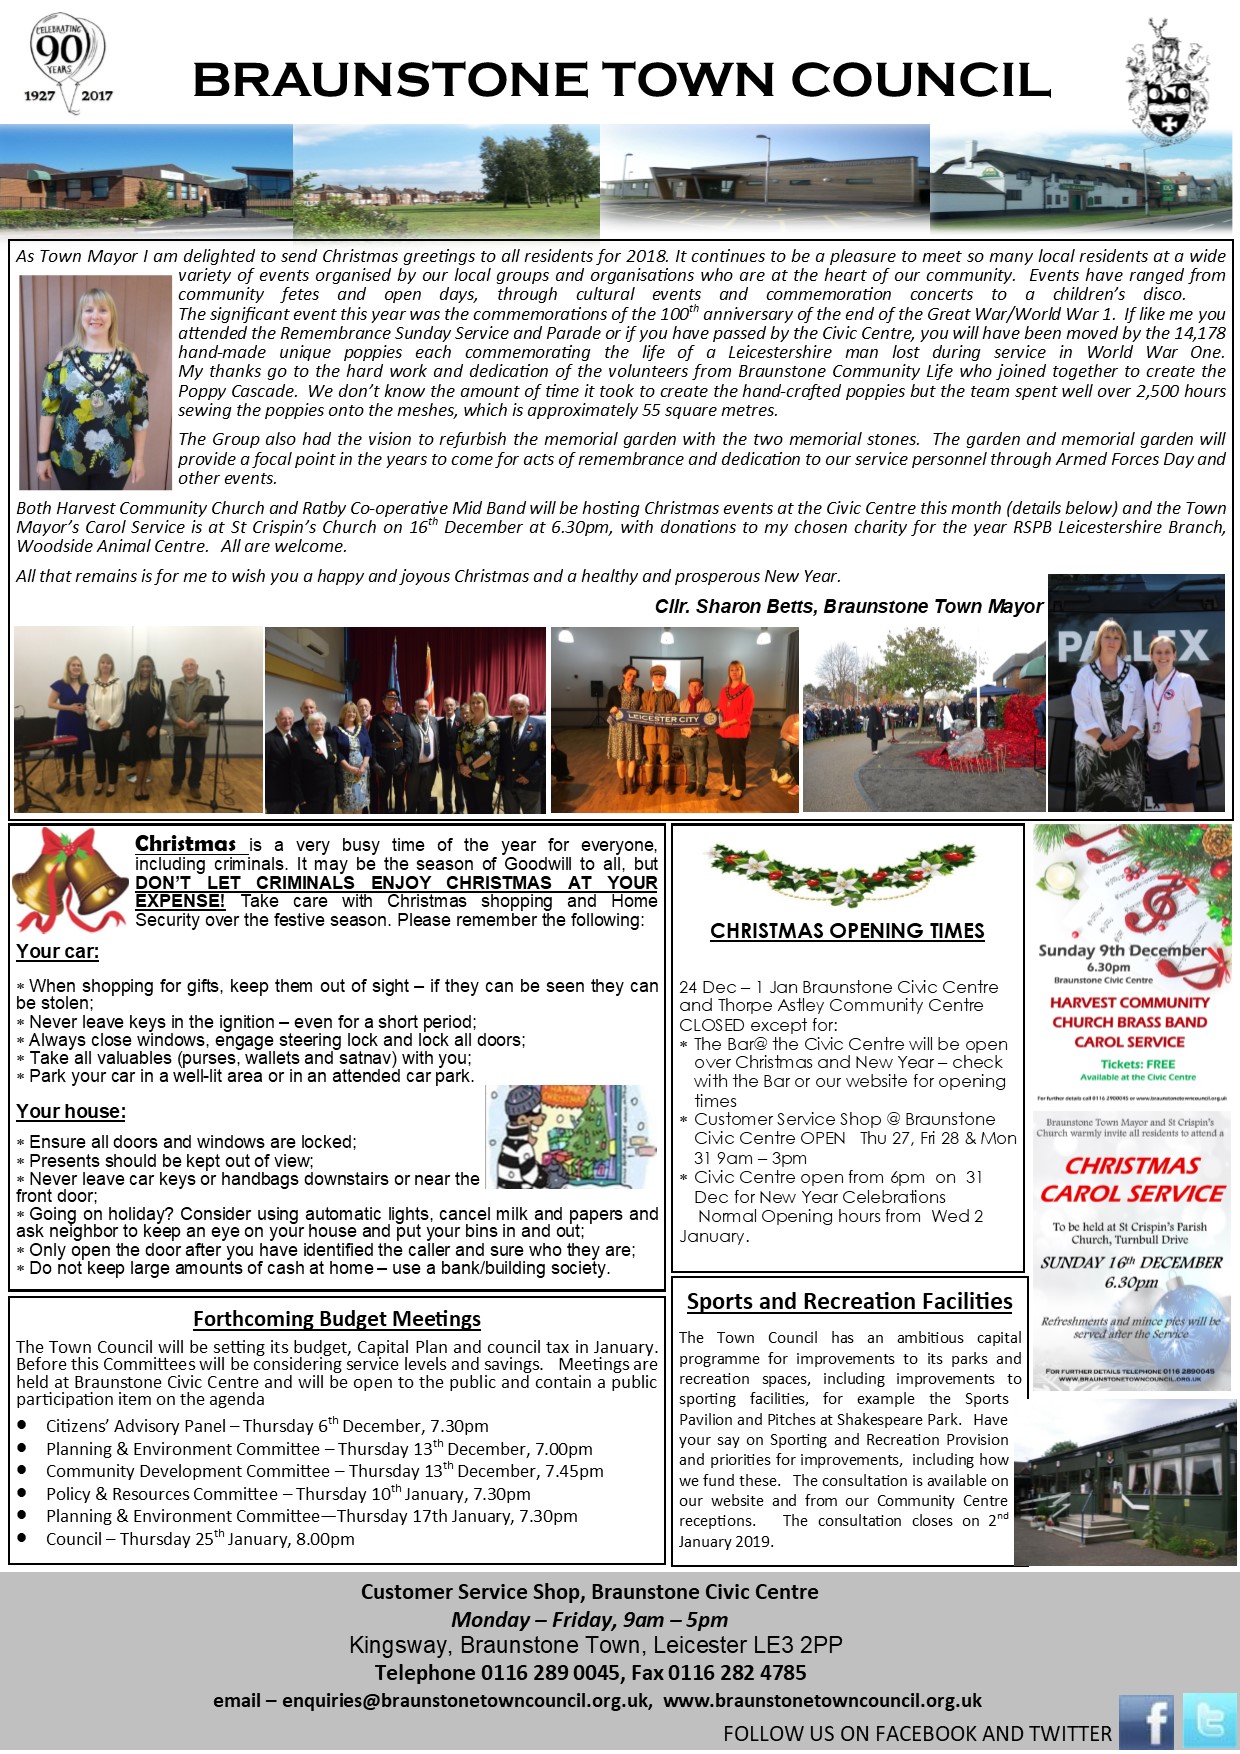 The Town Council article from the December 2018 issue of the Braunstone Life